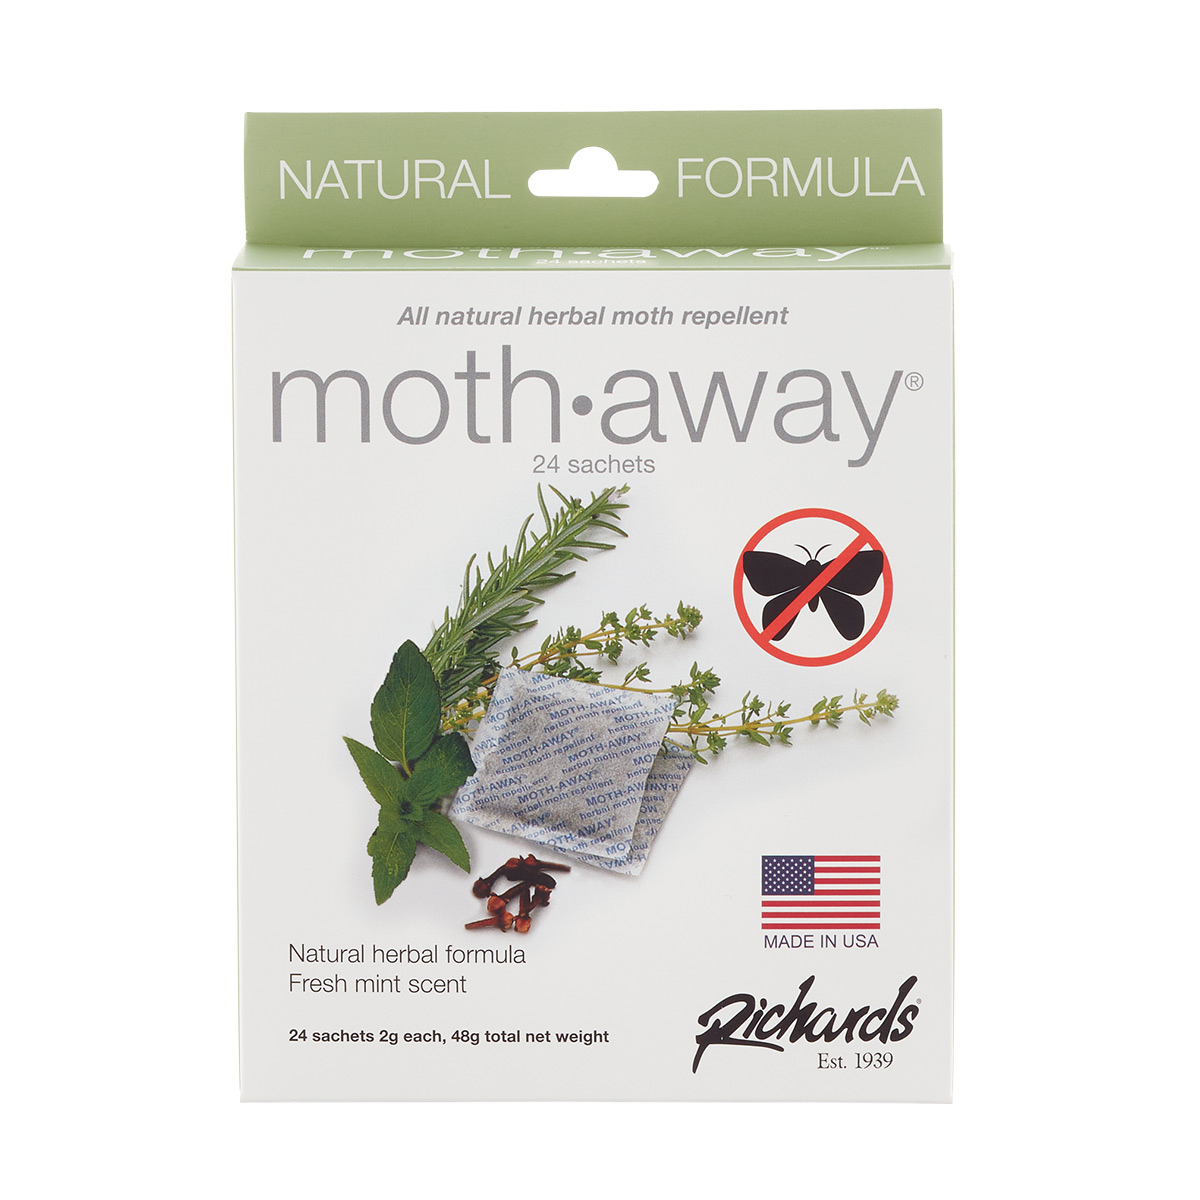 https://www.containerstore.com/catalogimages/502575/10095150-moth-away-repellent-sachets.jpg